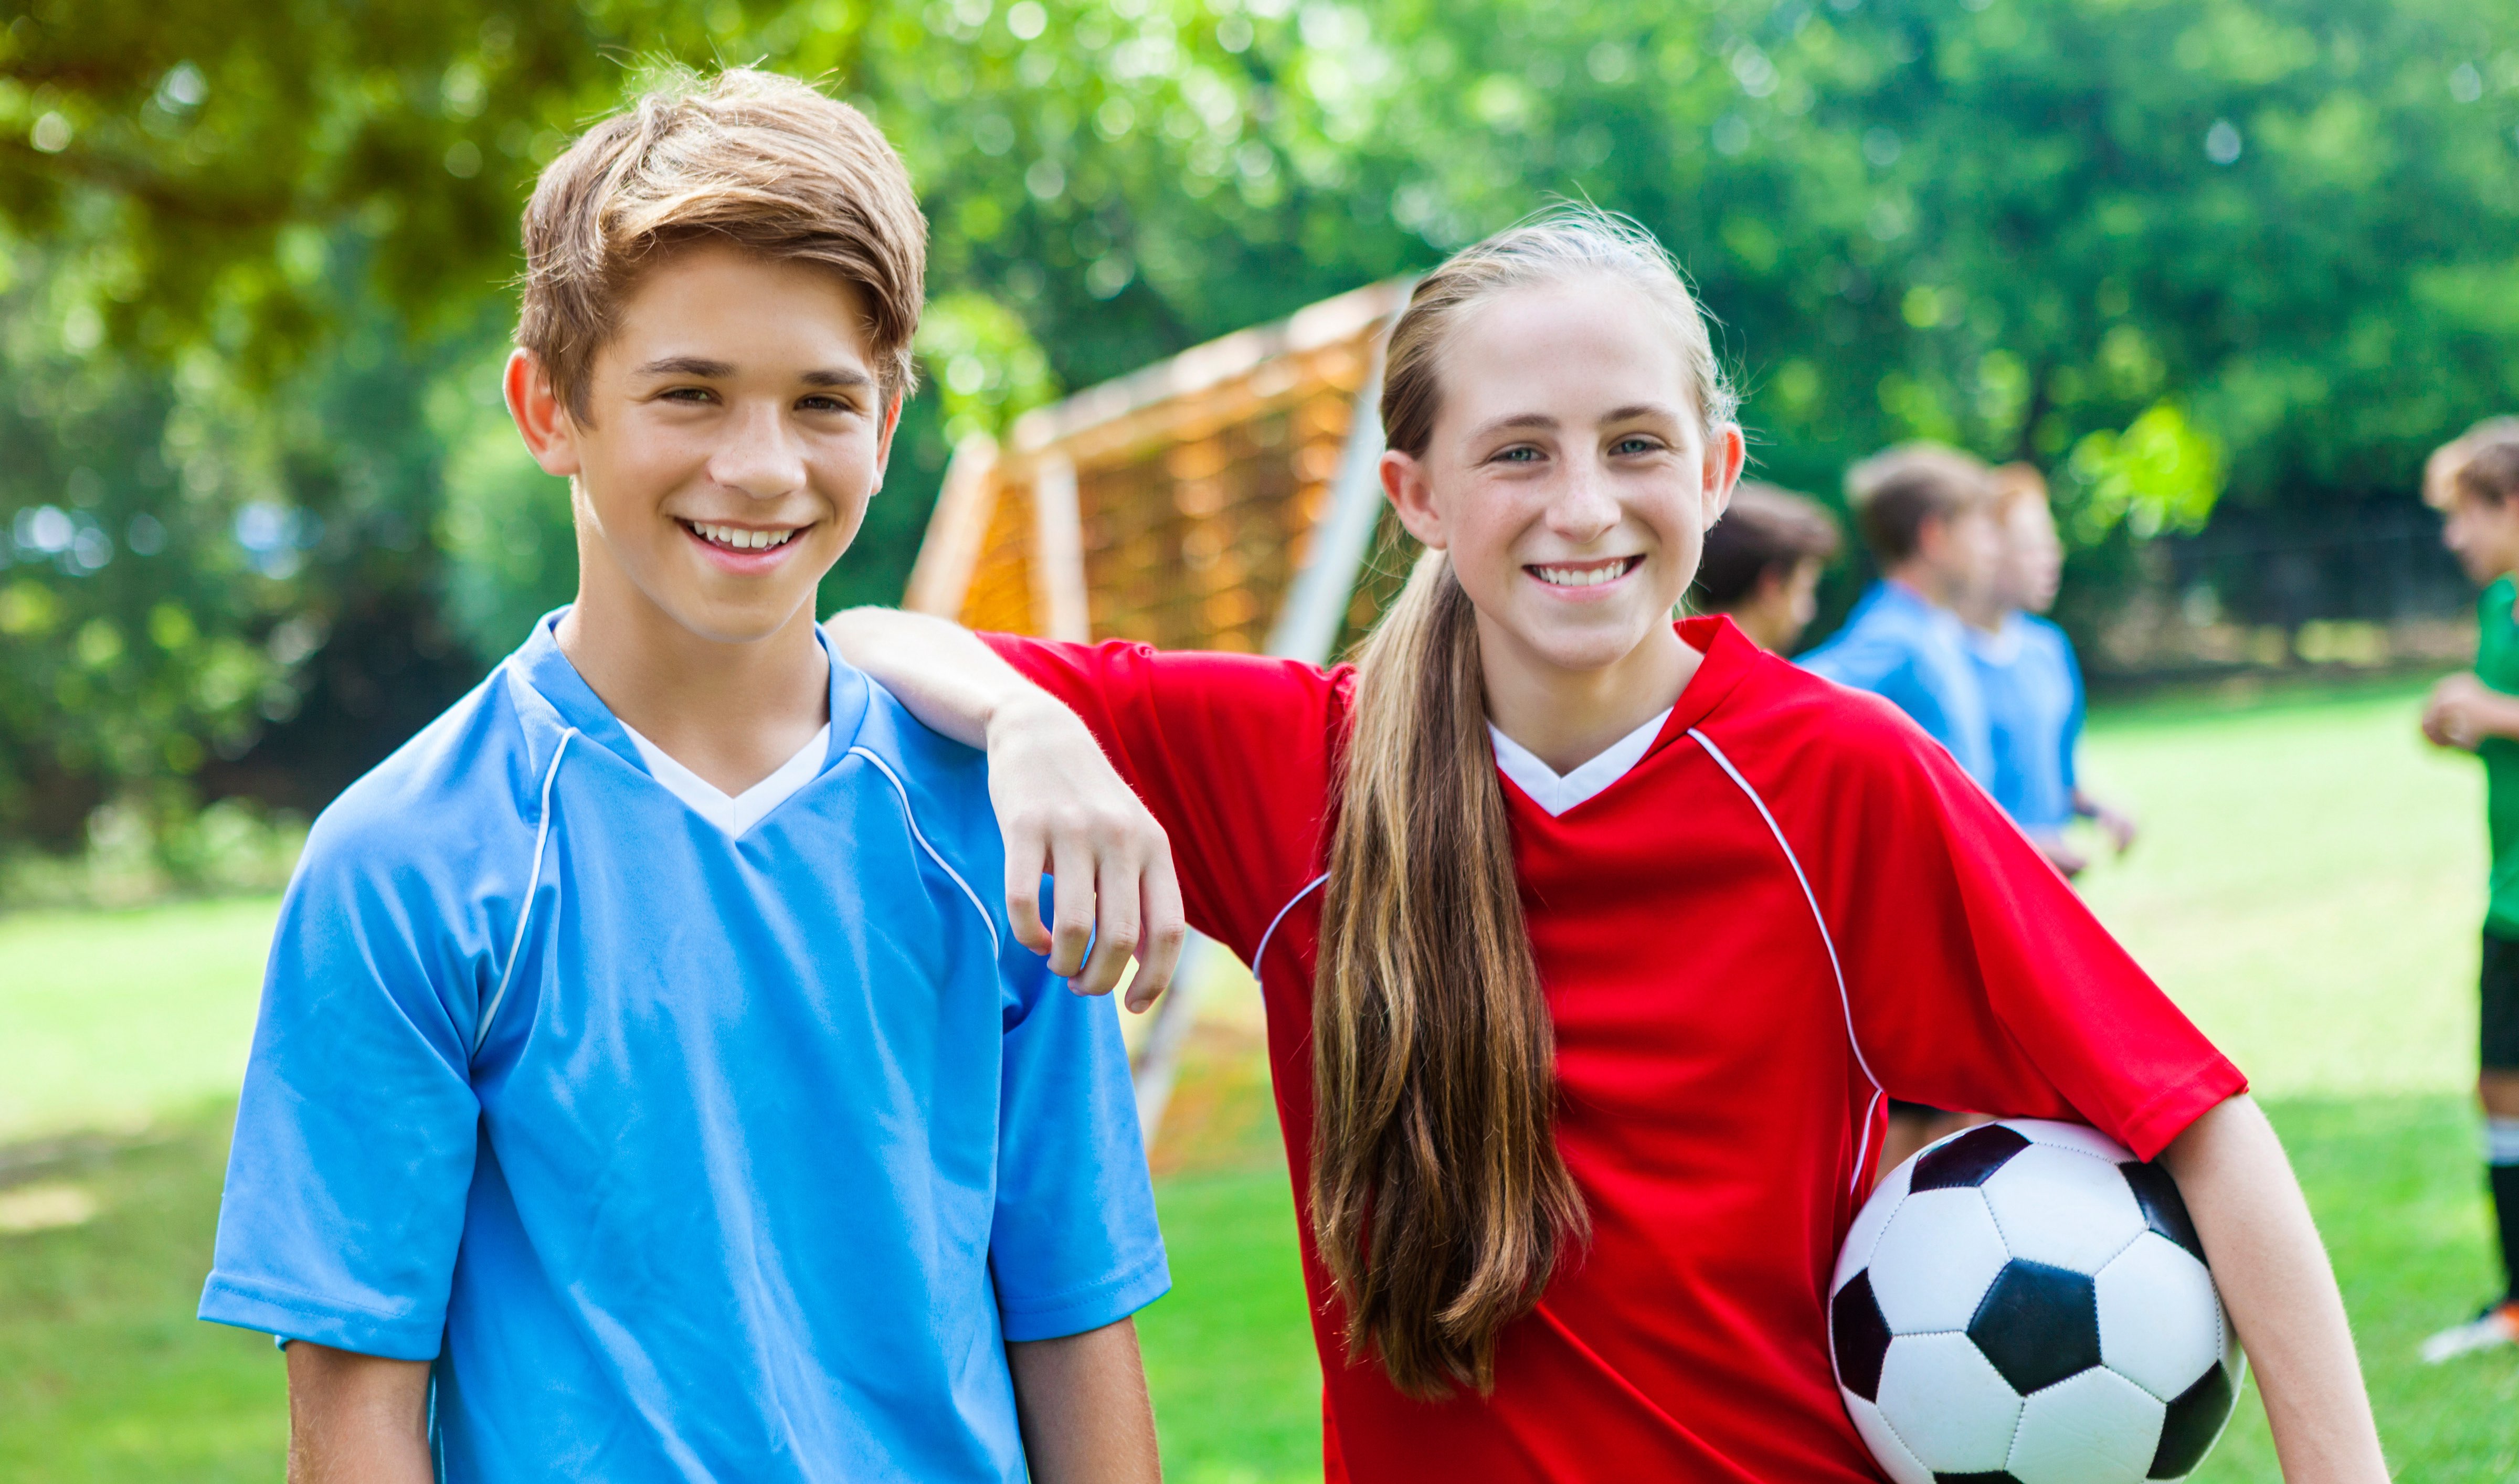 Why is sport important for kids? - Medvisit